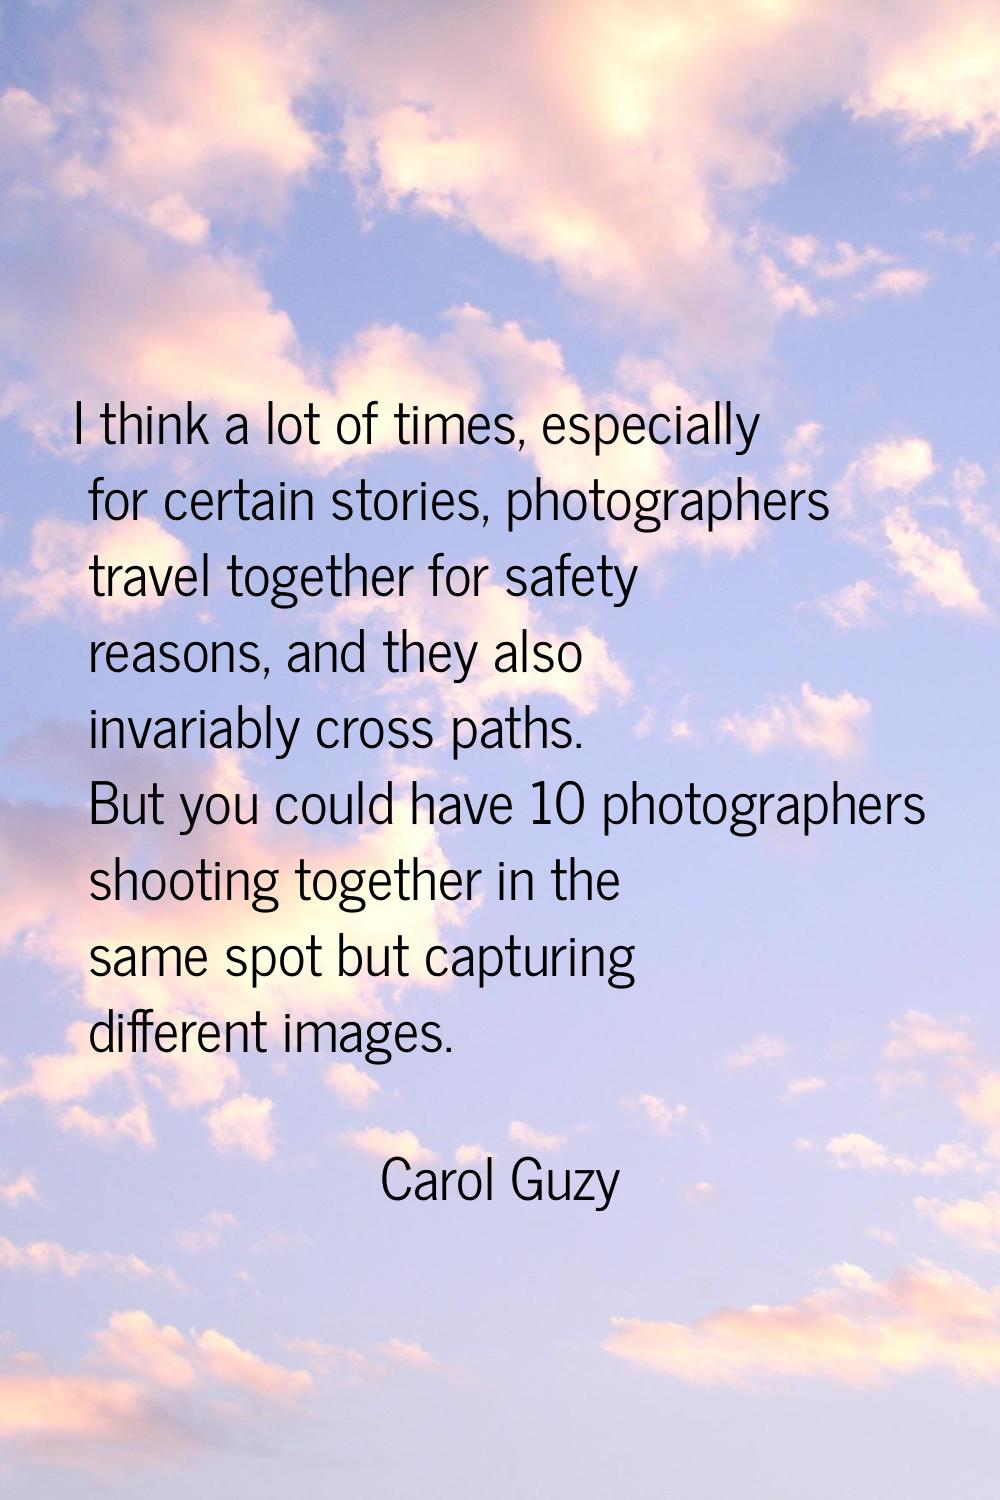 I think a lot of times, especially for certain stories, photographers travel together for safety re